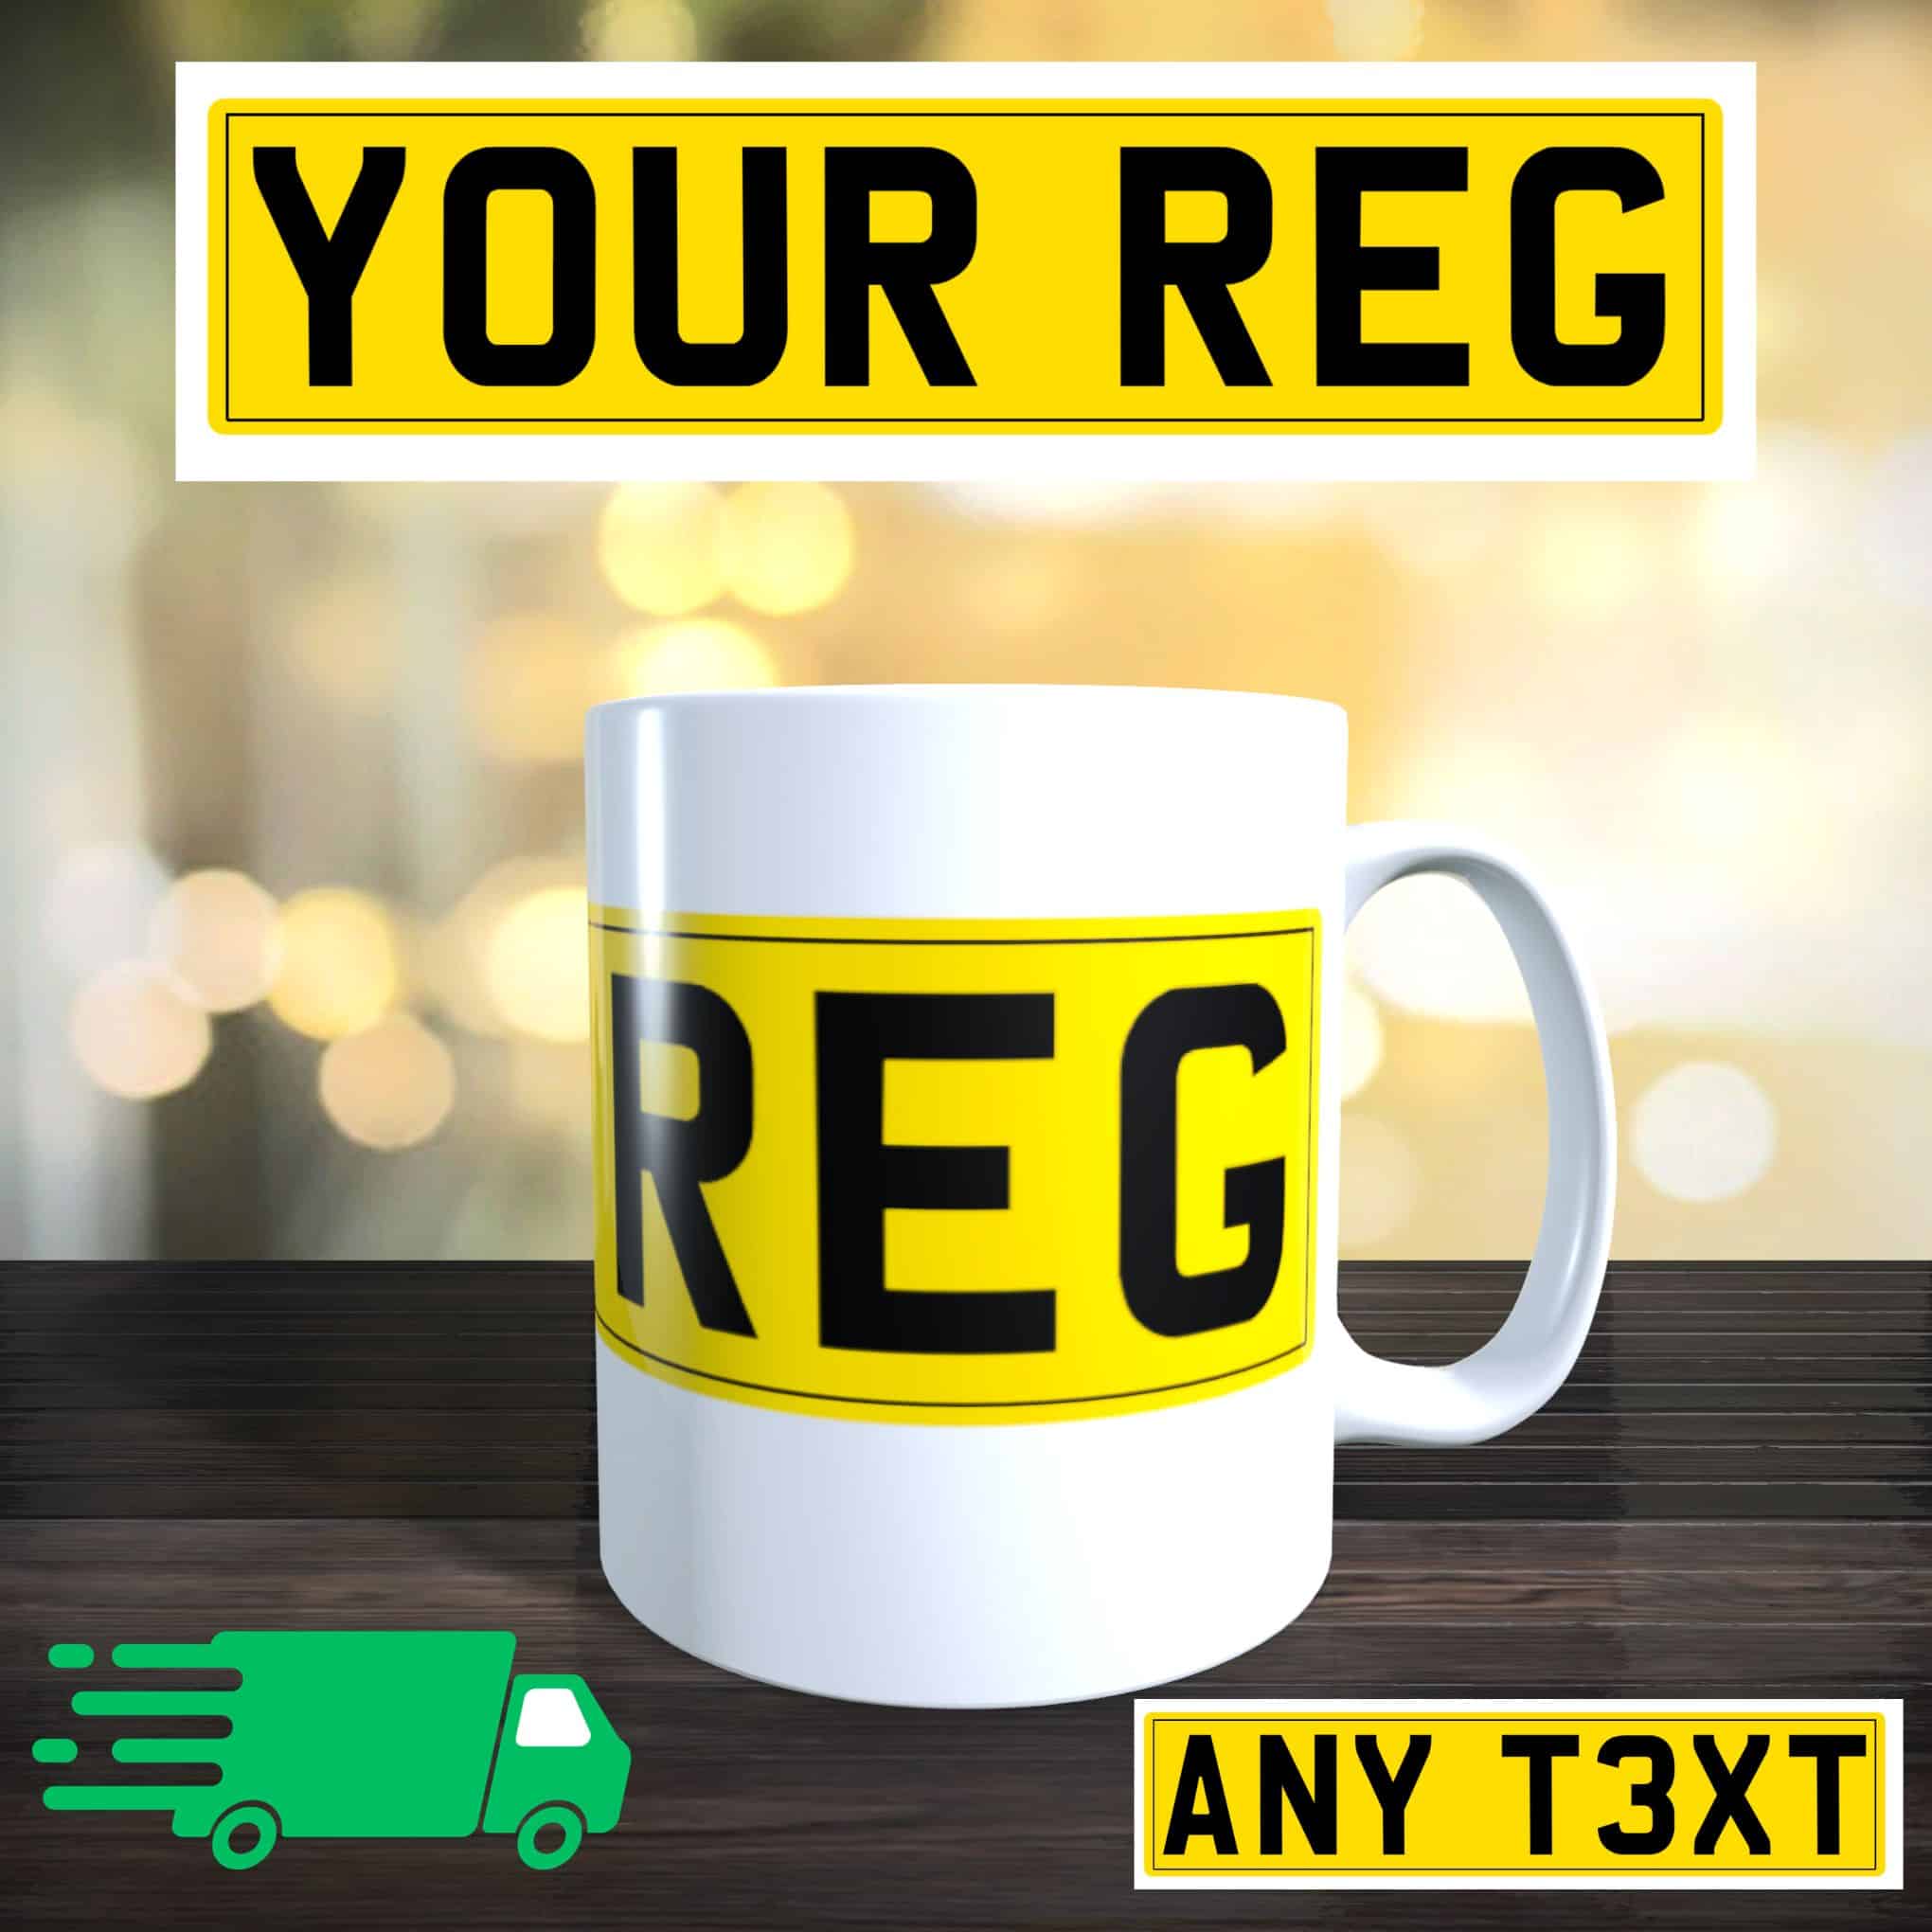 NUMBER PLATE Personalised Car Registration license Reg Plate Mug cup Any T3XT - main product image